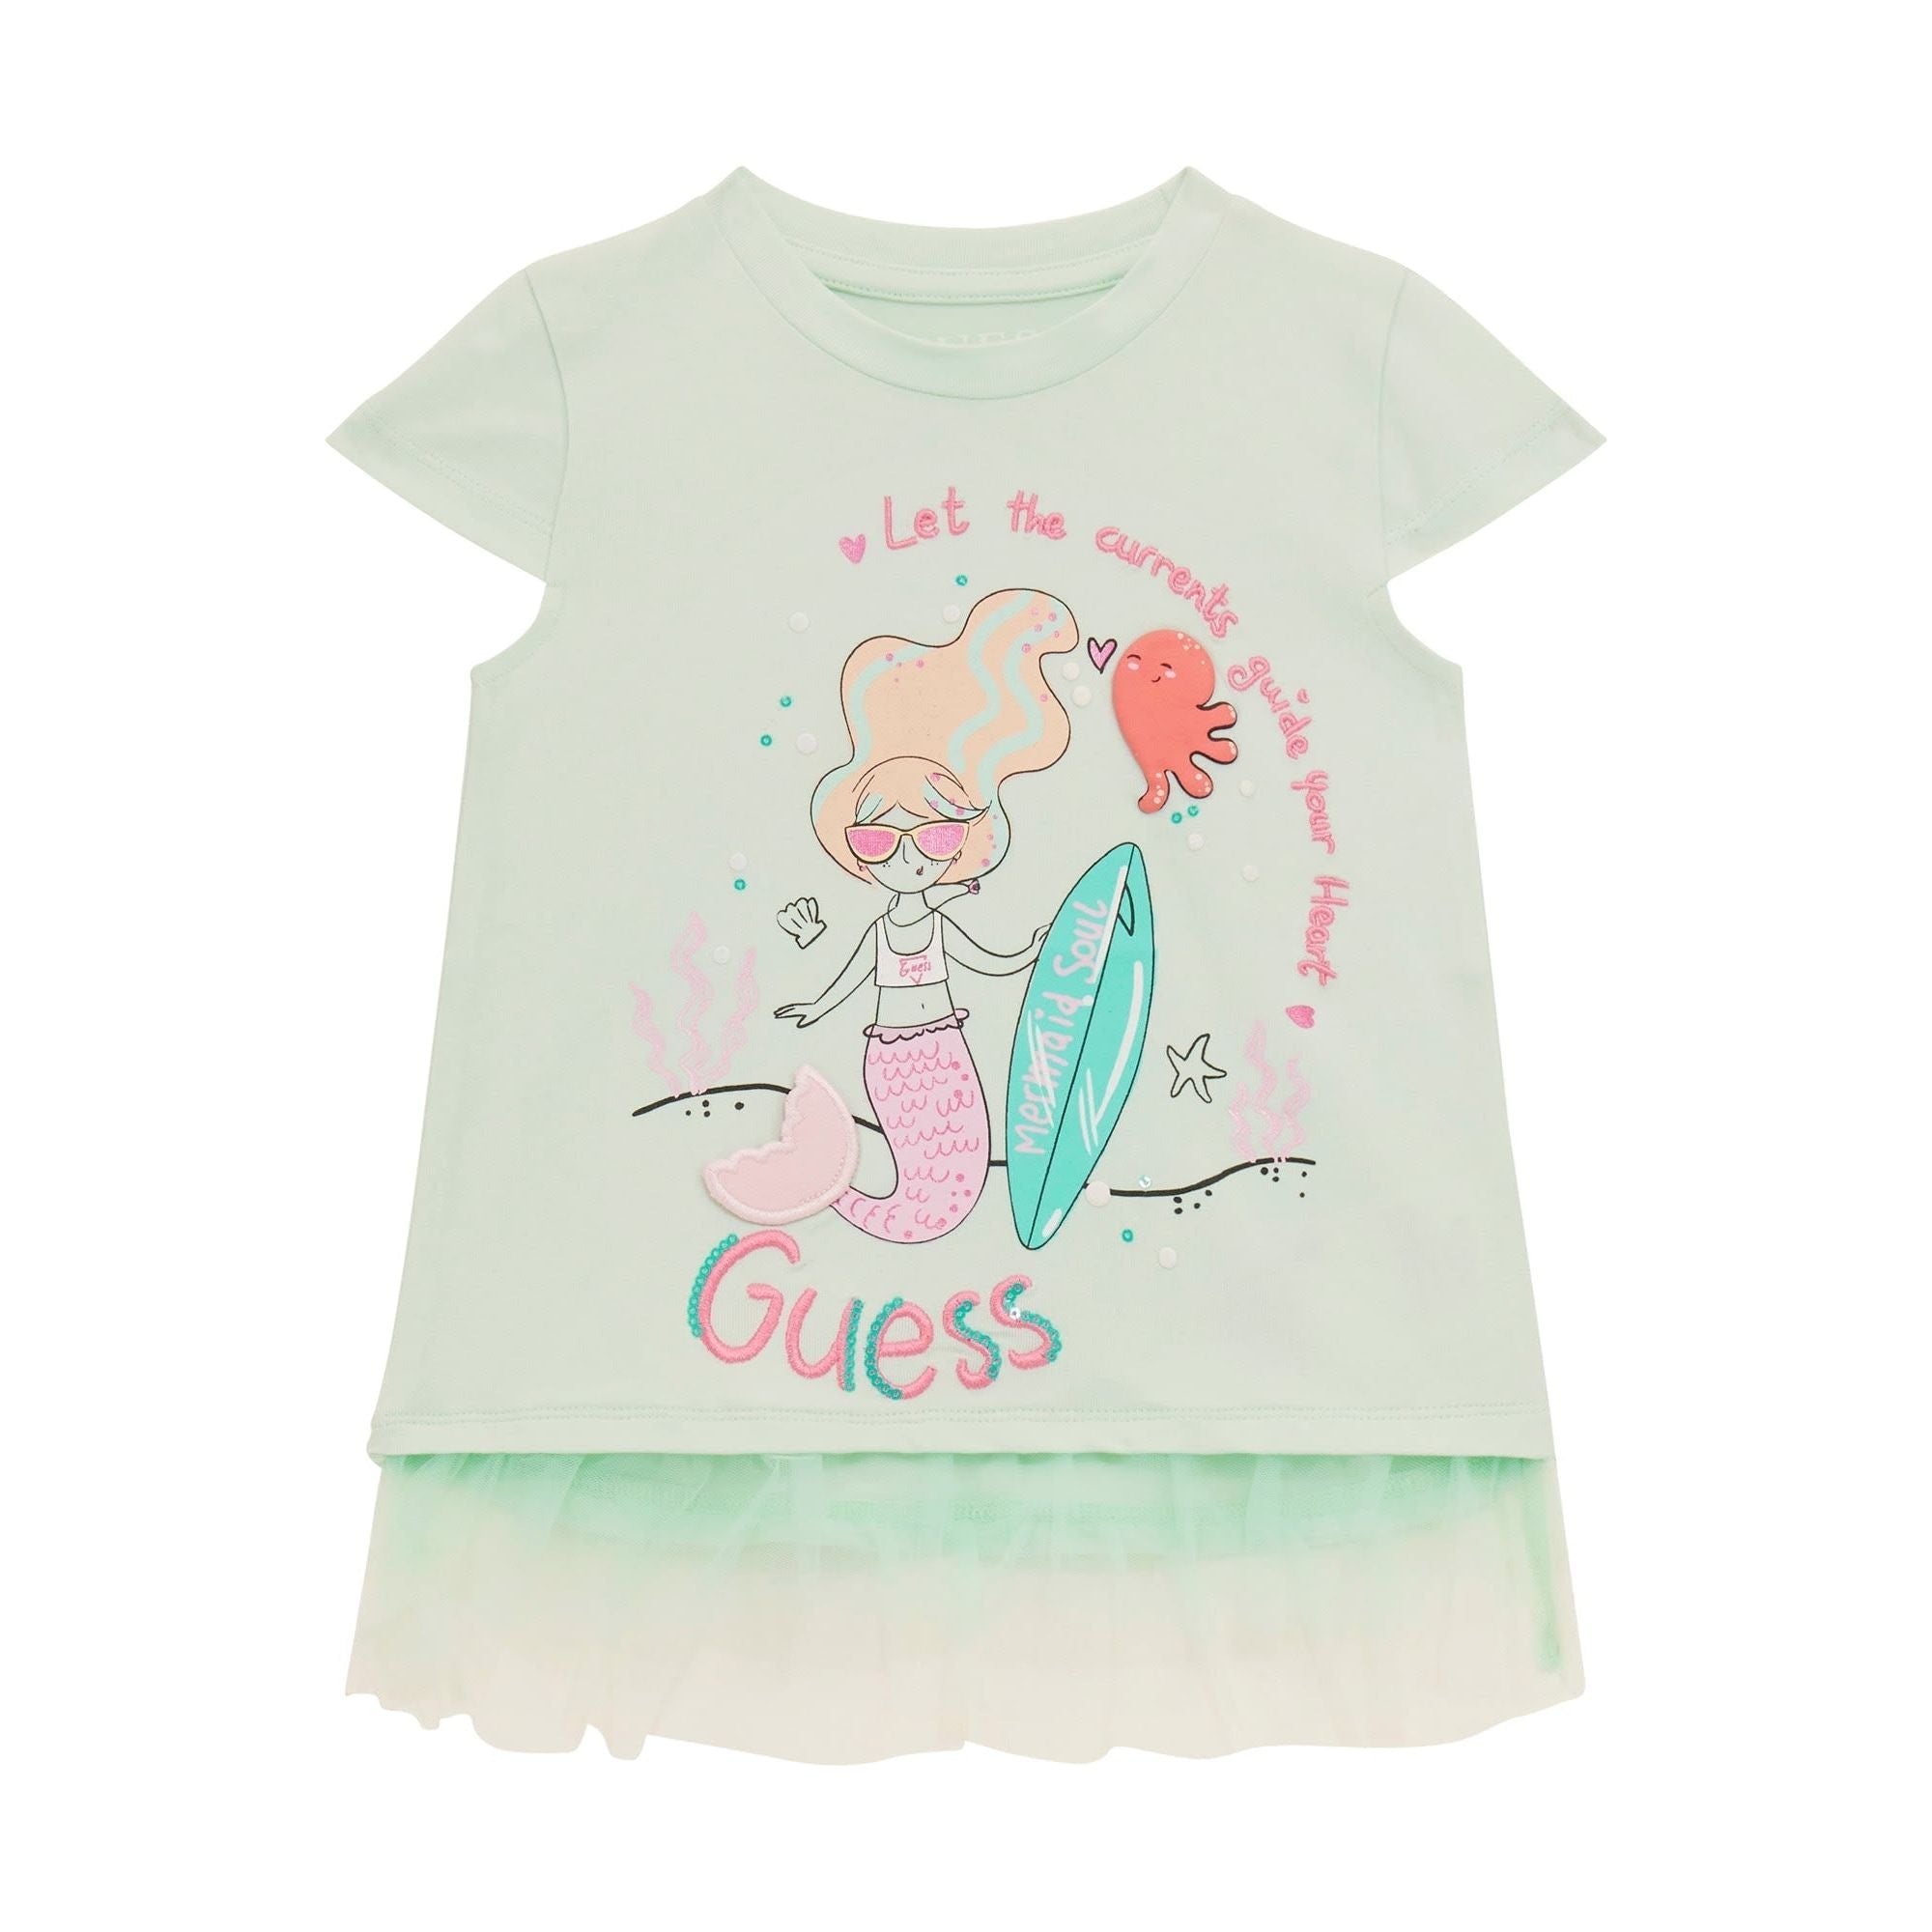 Guess - Toddler T-Shirt in Caribbean Holiday